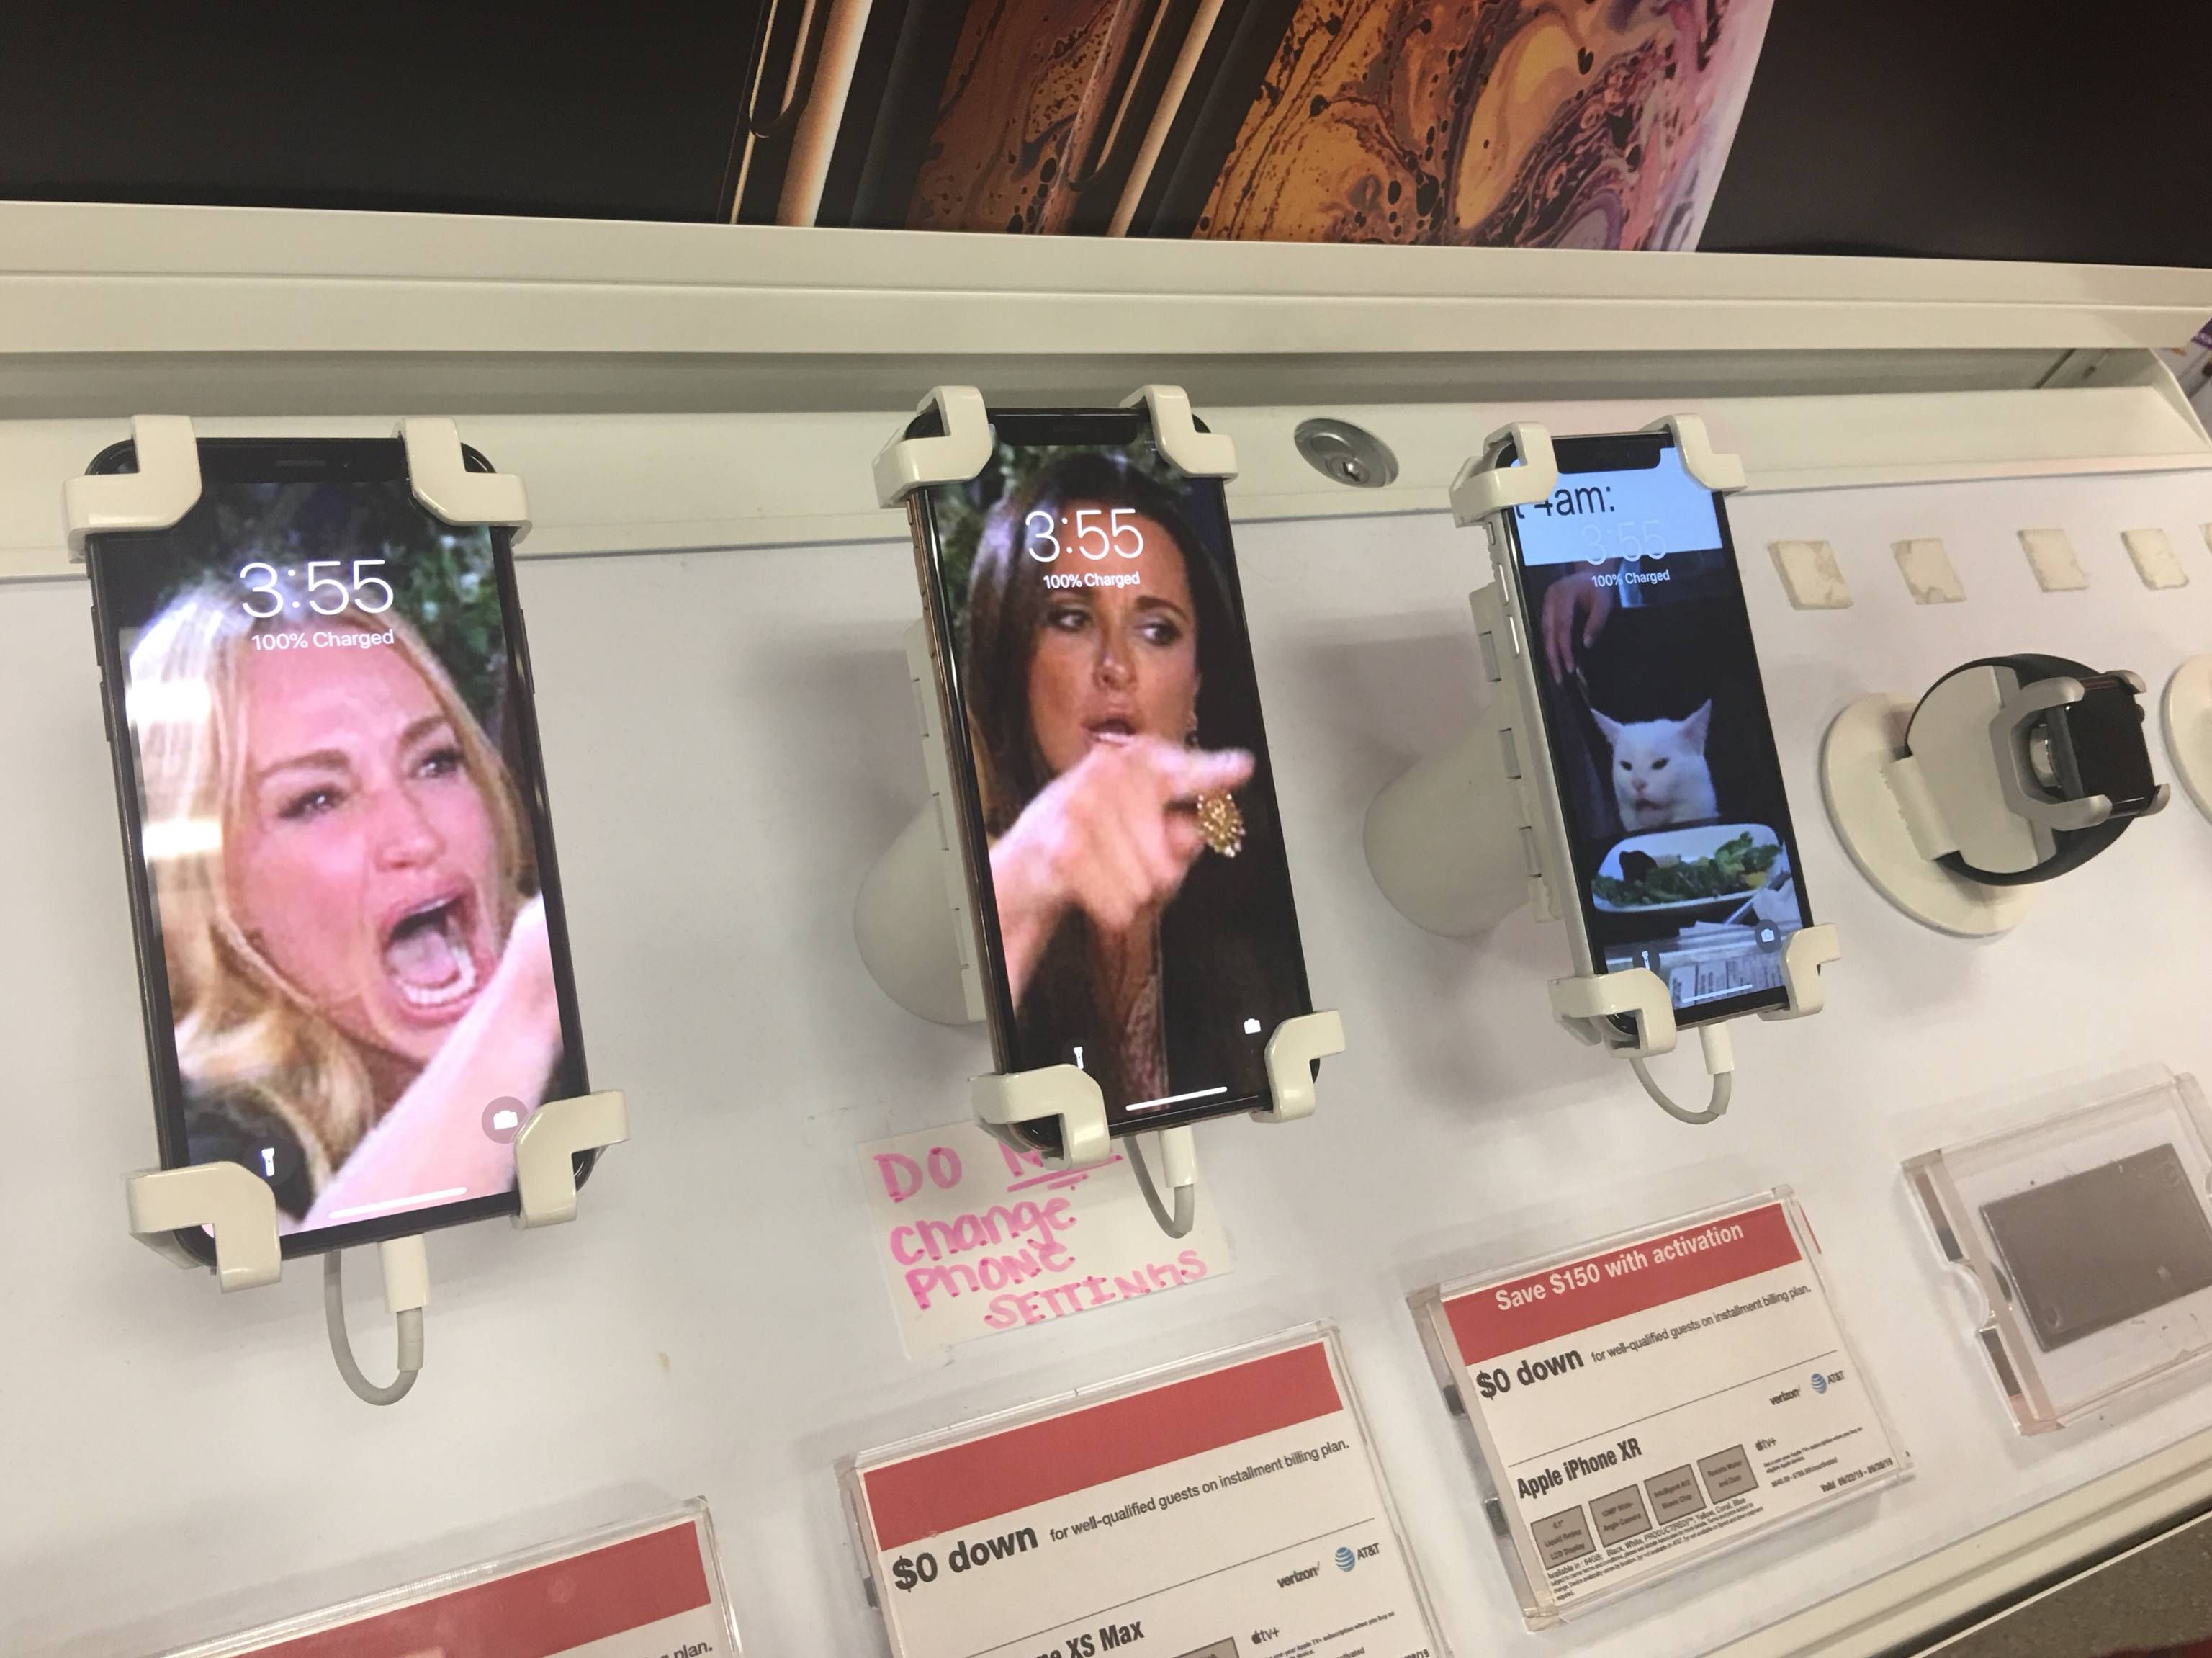 Walked by this at my local Target